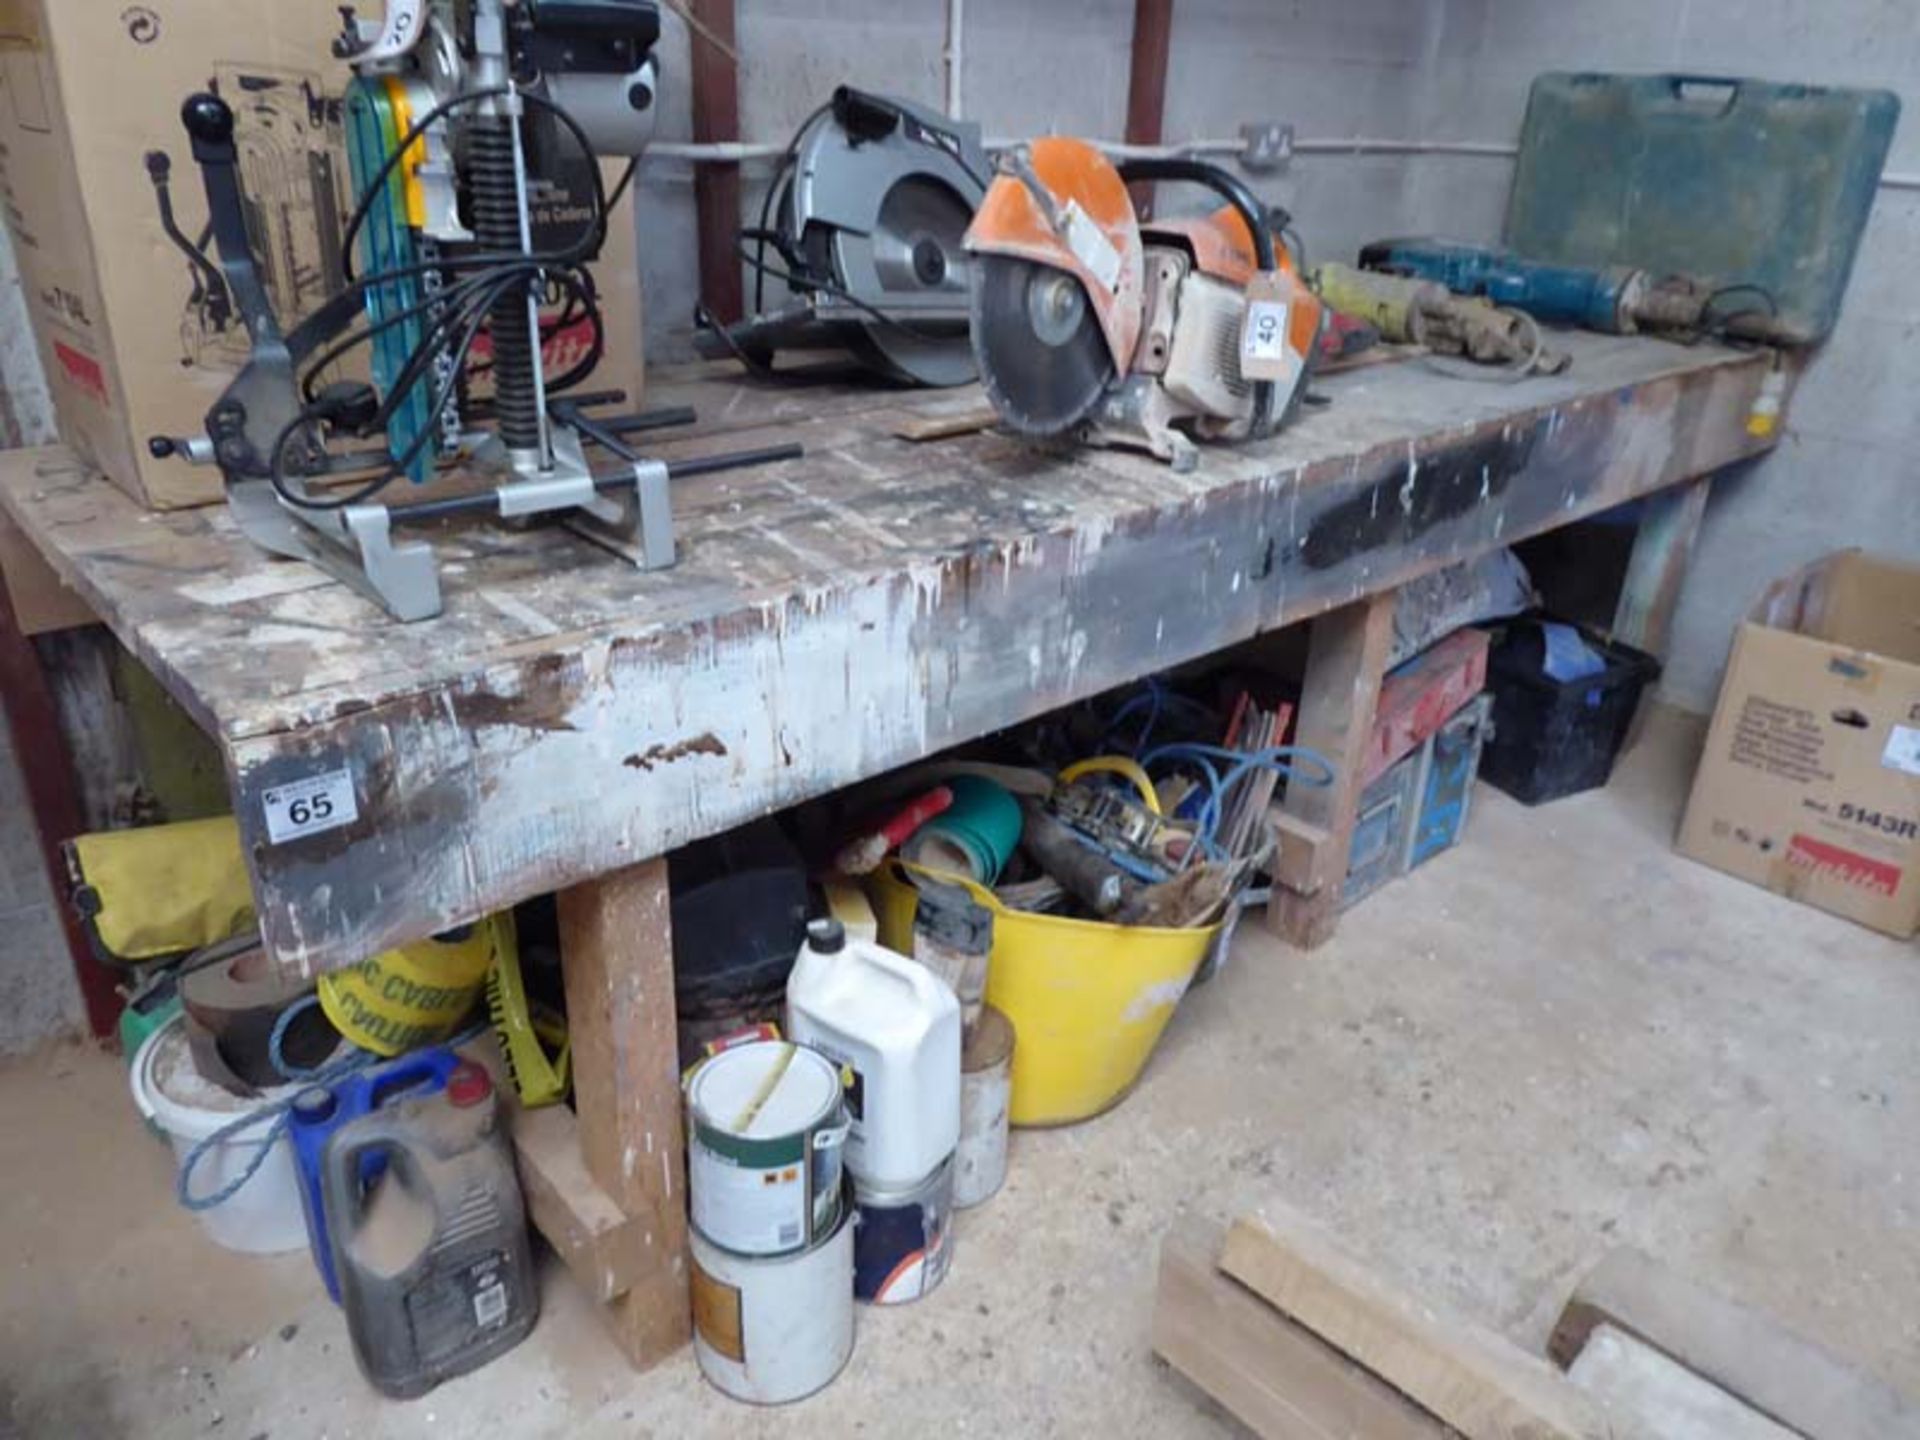 2 3m carpenters workbenches